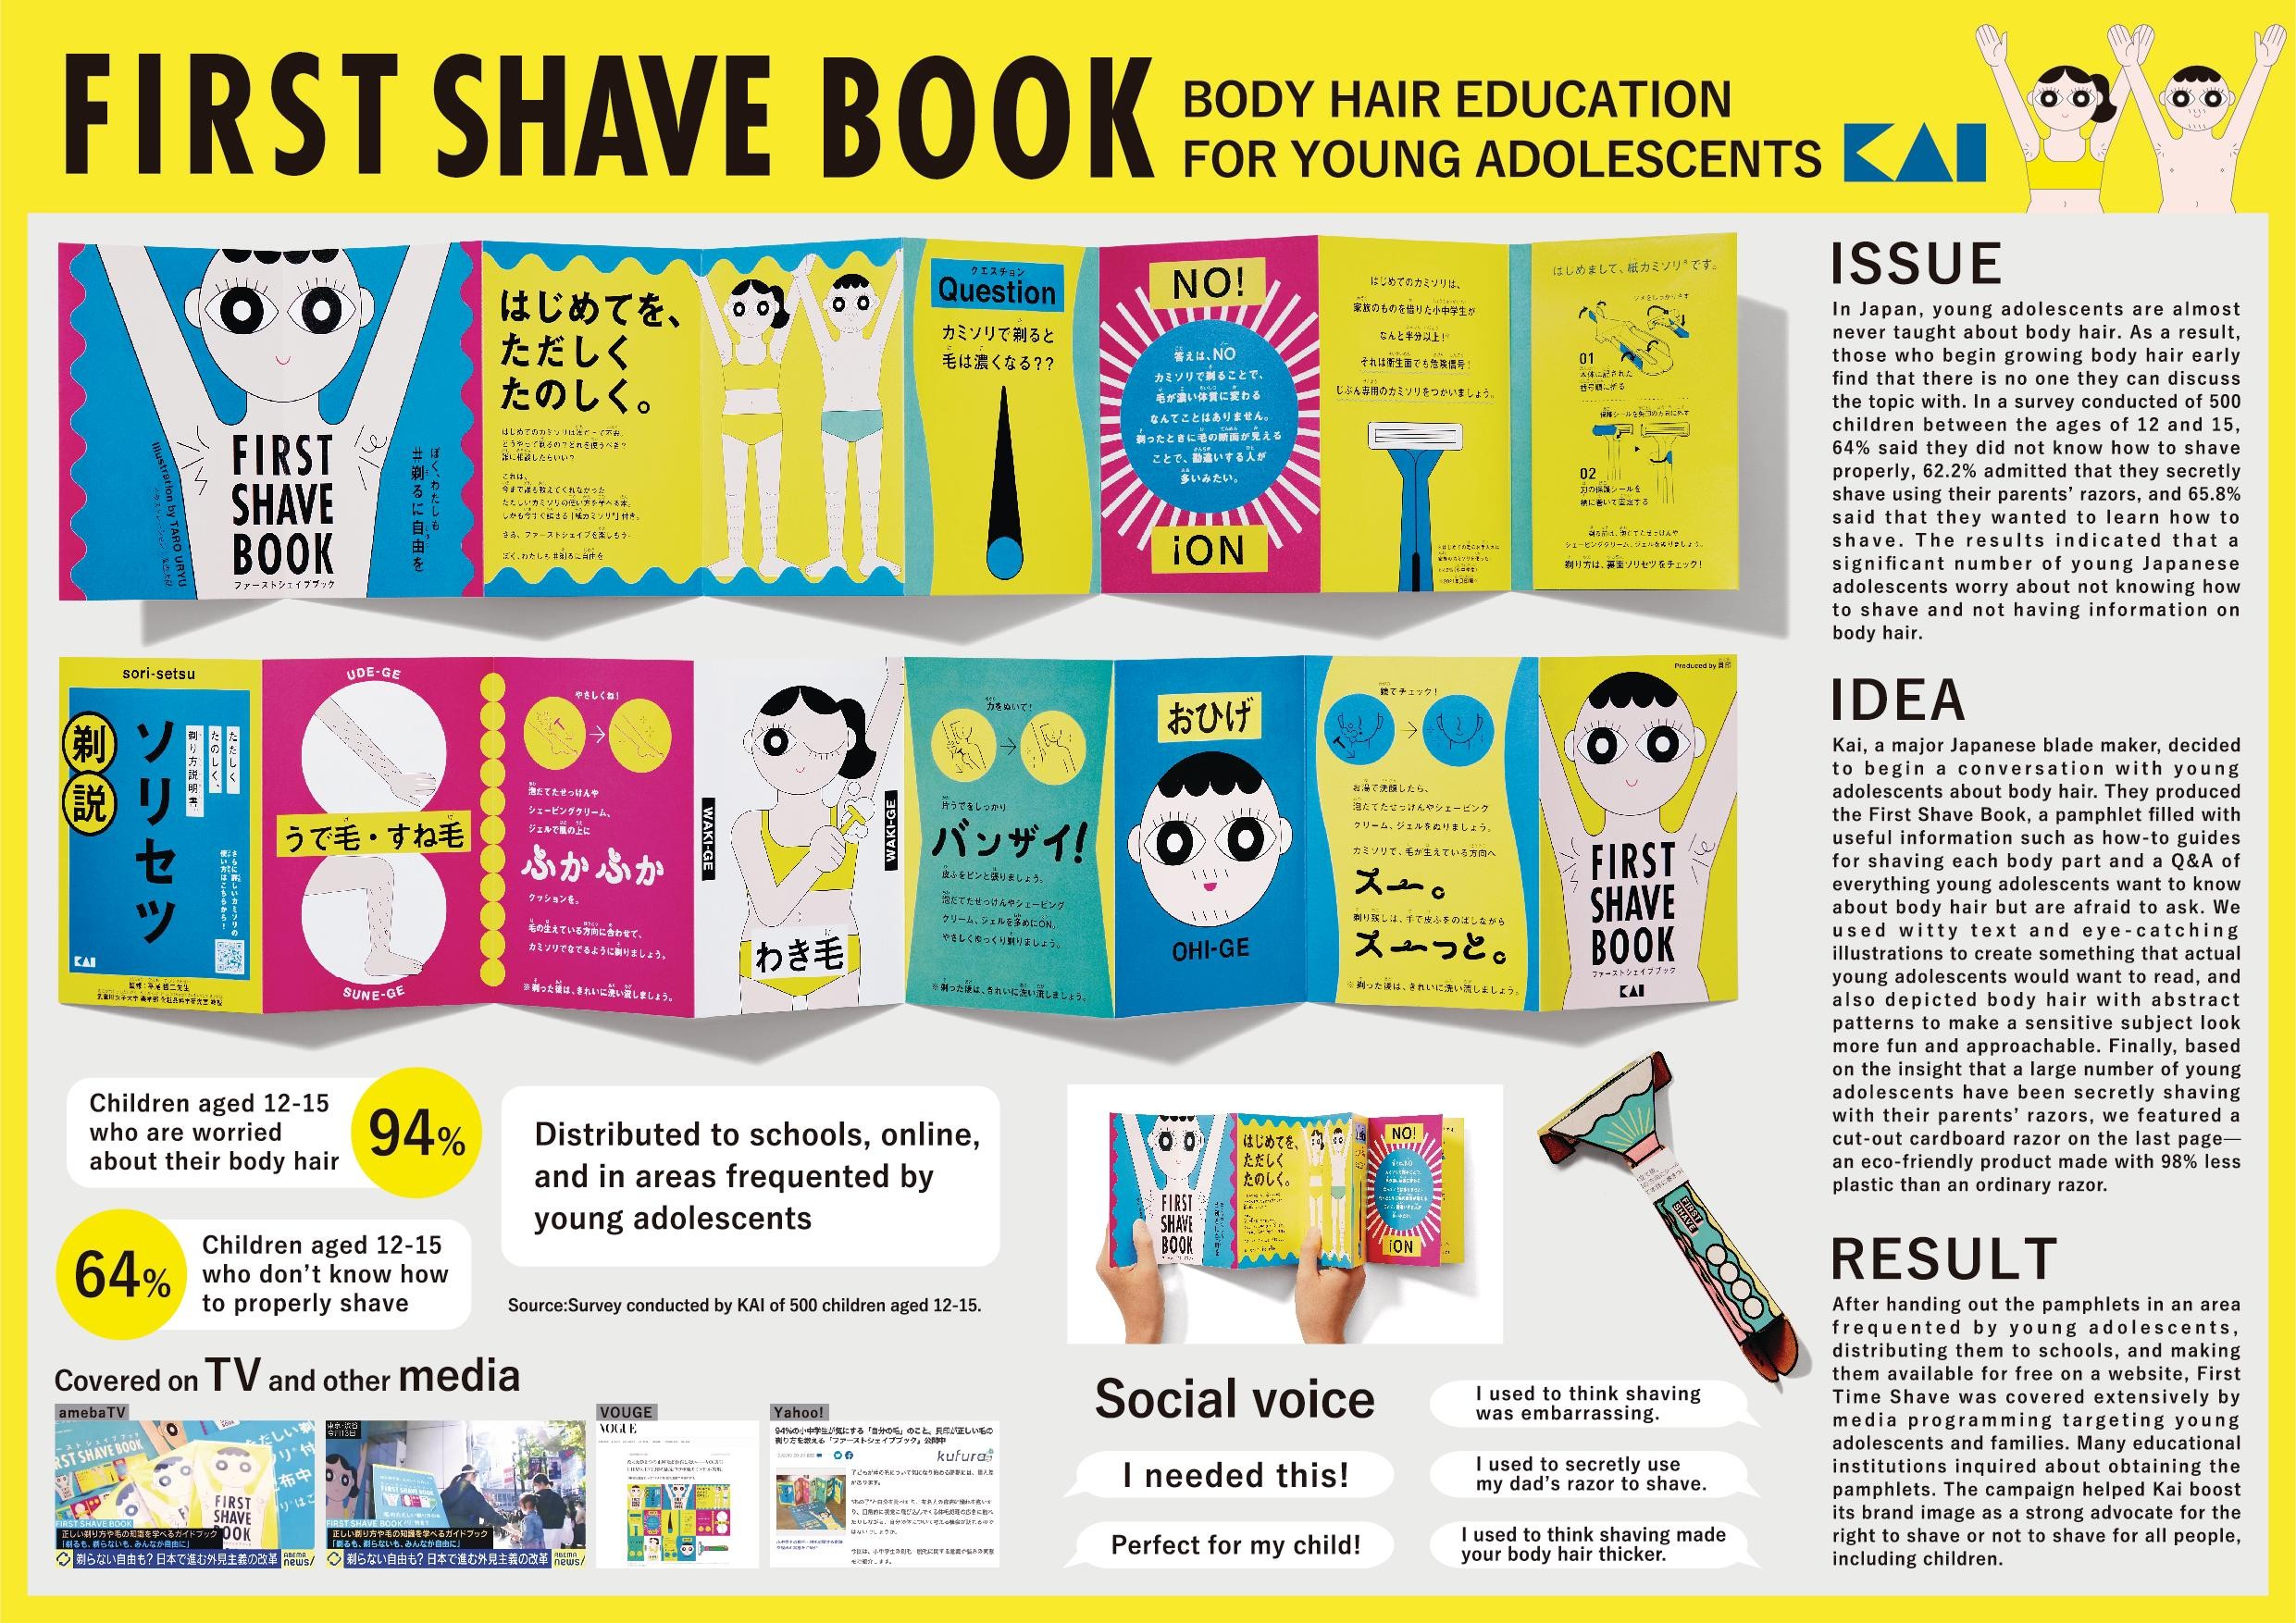 FIRST SHAVE BOOK